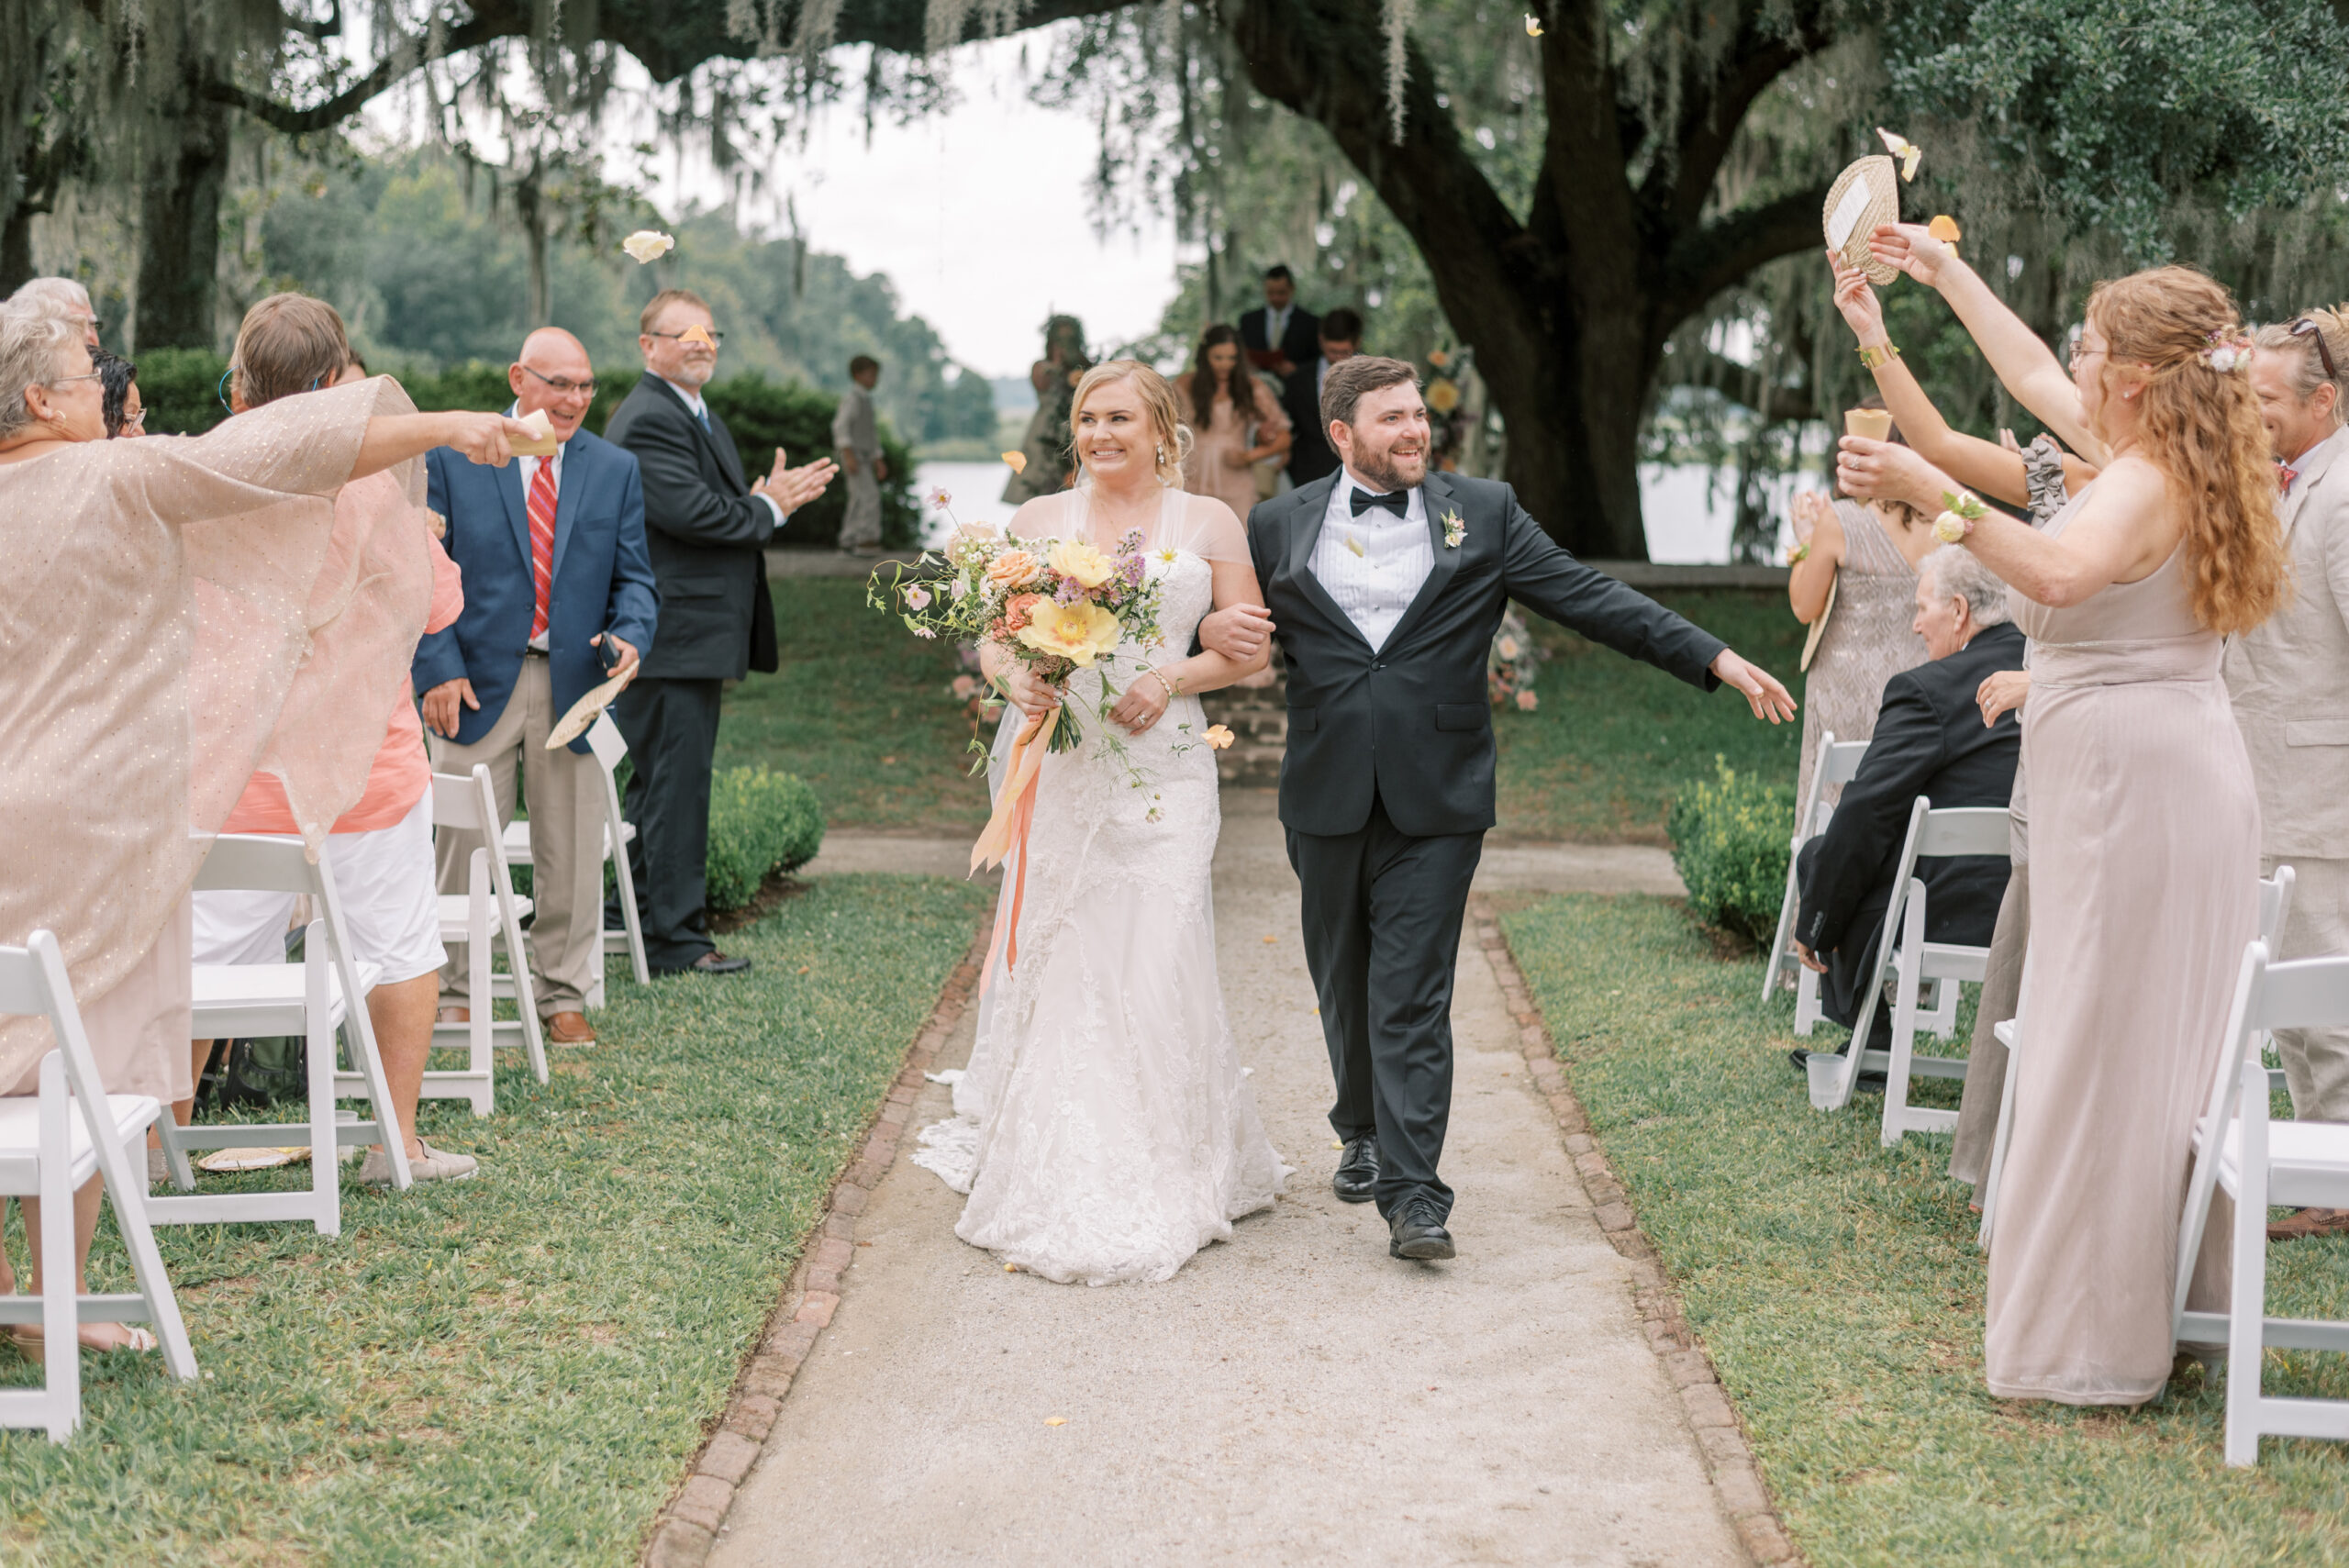 Newlyweds walk down the aisle at Middleton Place under flower petal confetti